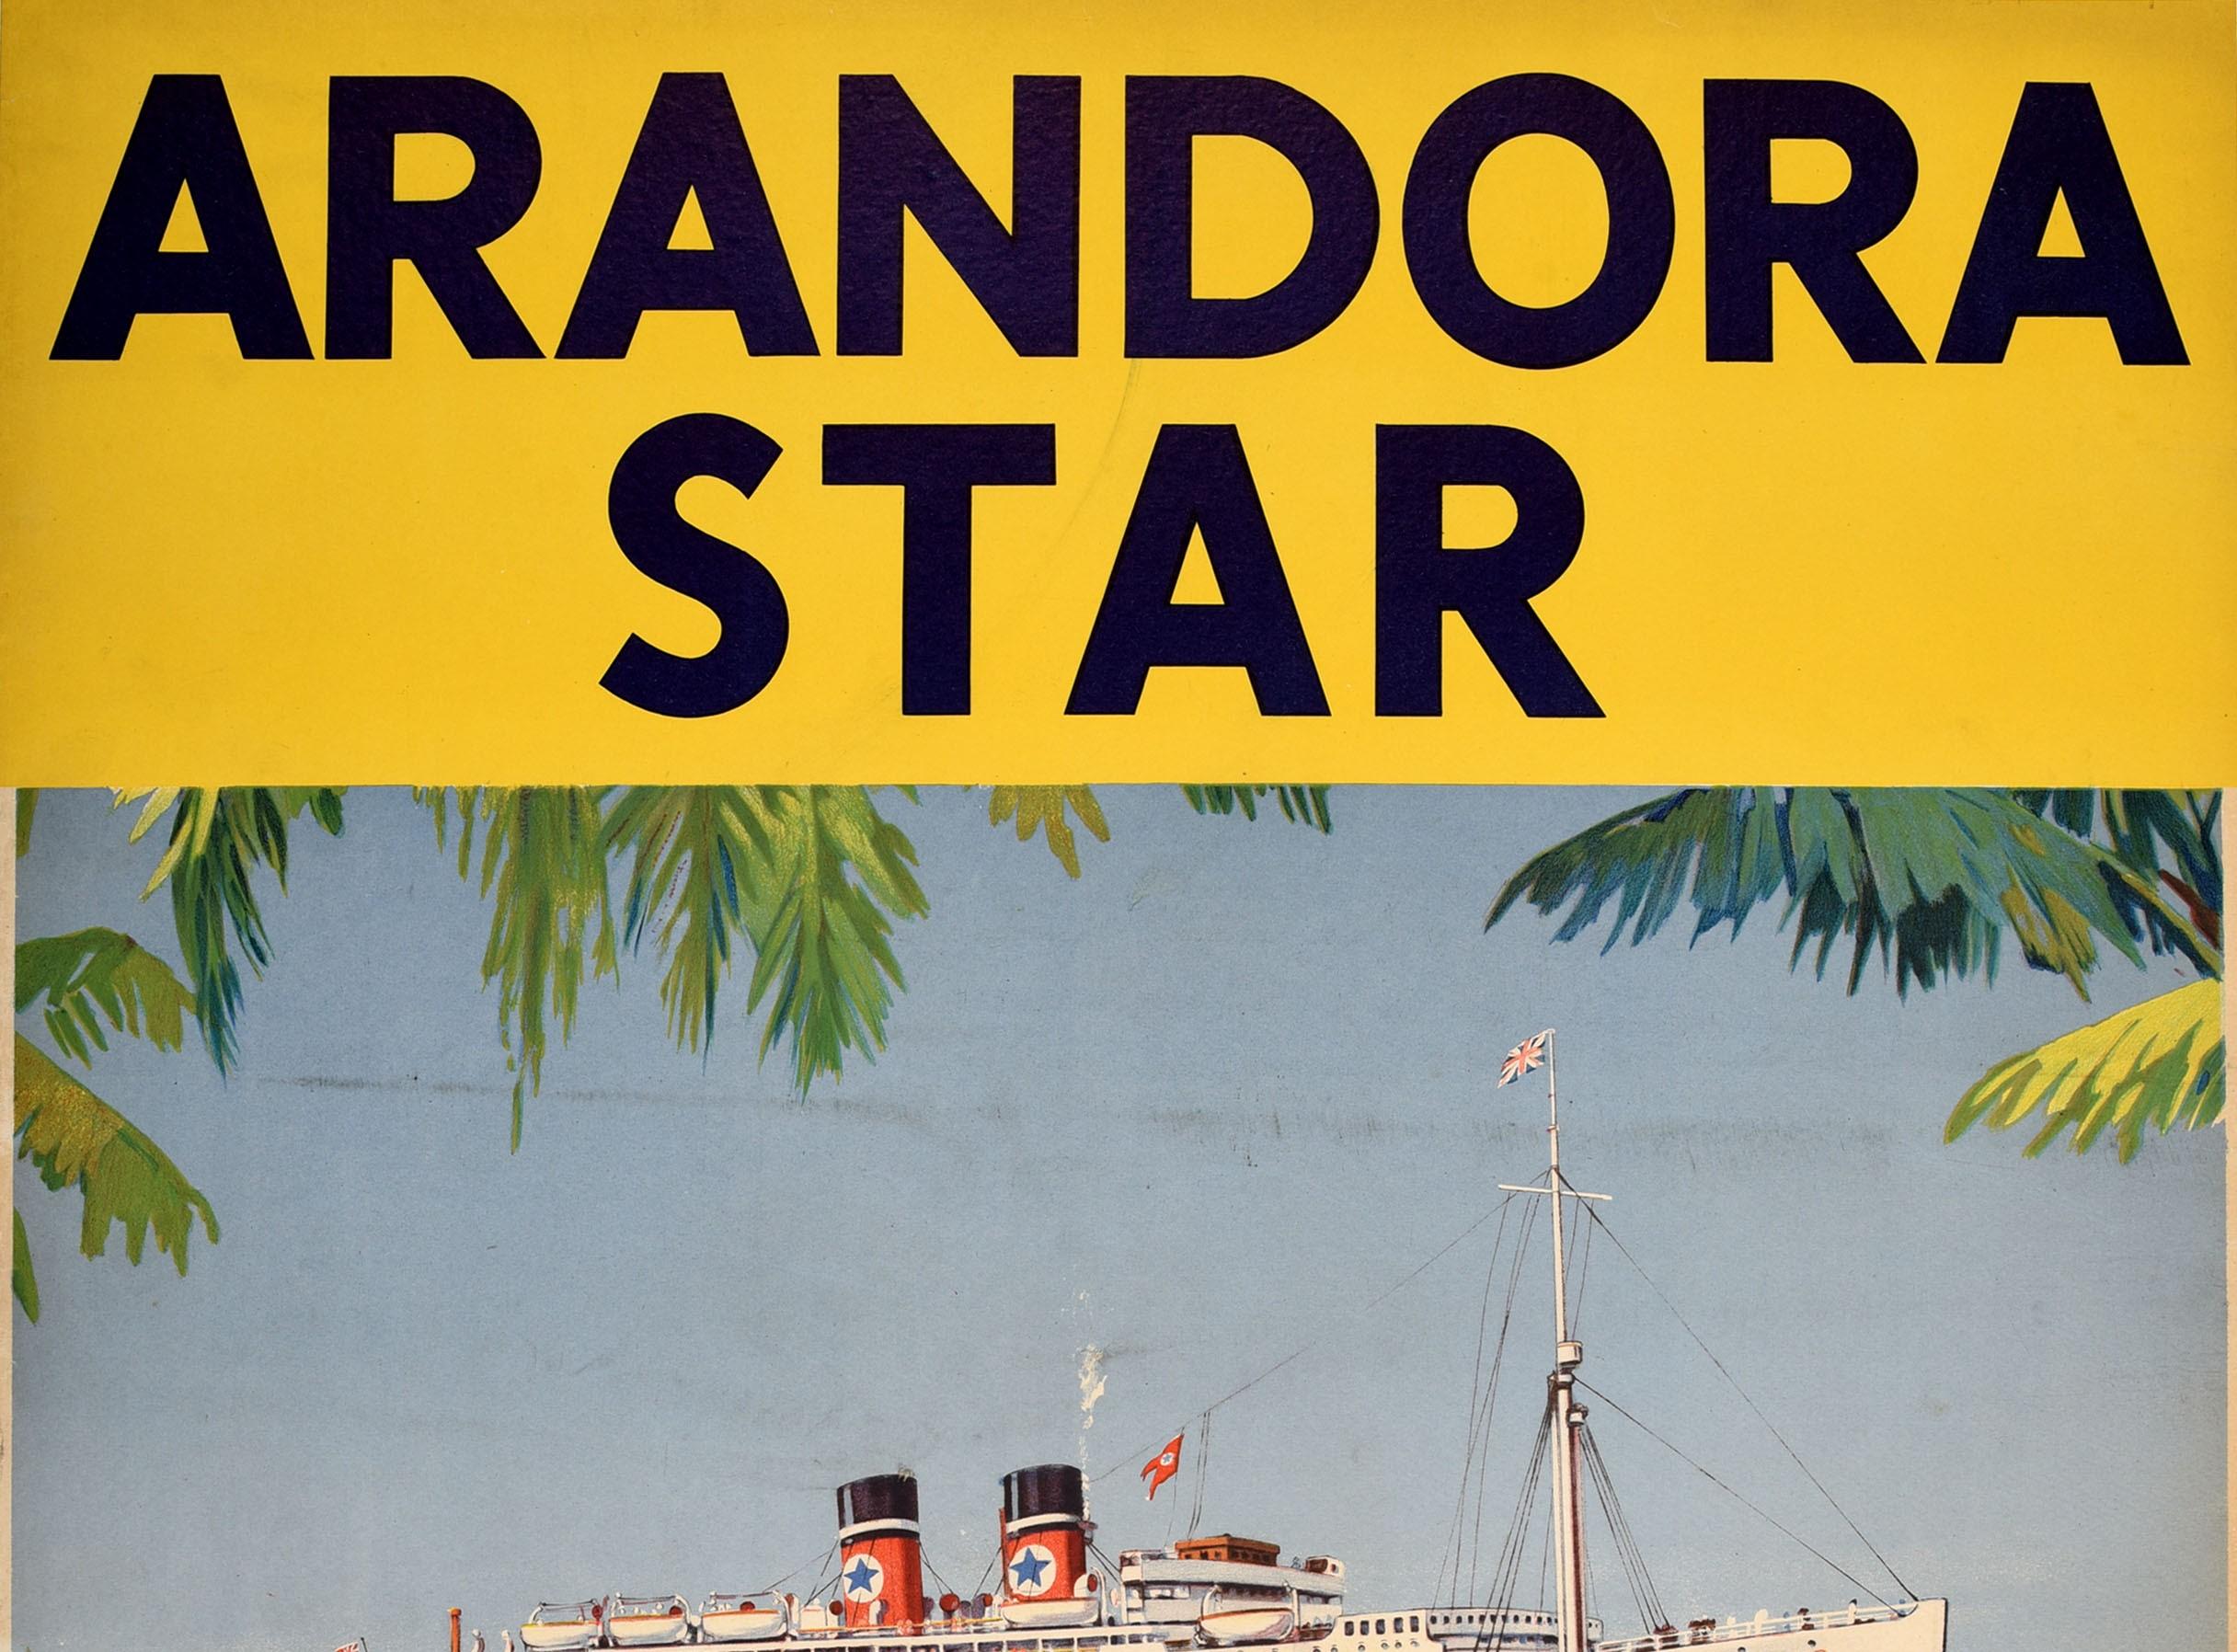 Original vintage cruise travel poster for Arandora Star the world's most delightful cruising liner Blue Star showing the ship moored at sea with passengers enjoying a trip to shore on small boats viewed from the coast with palm trees framing the